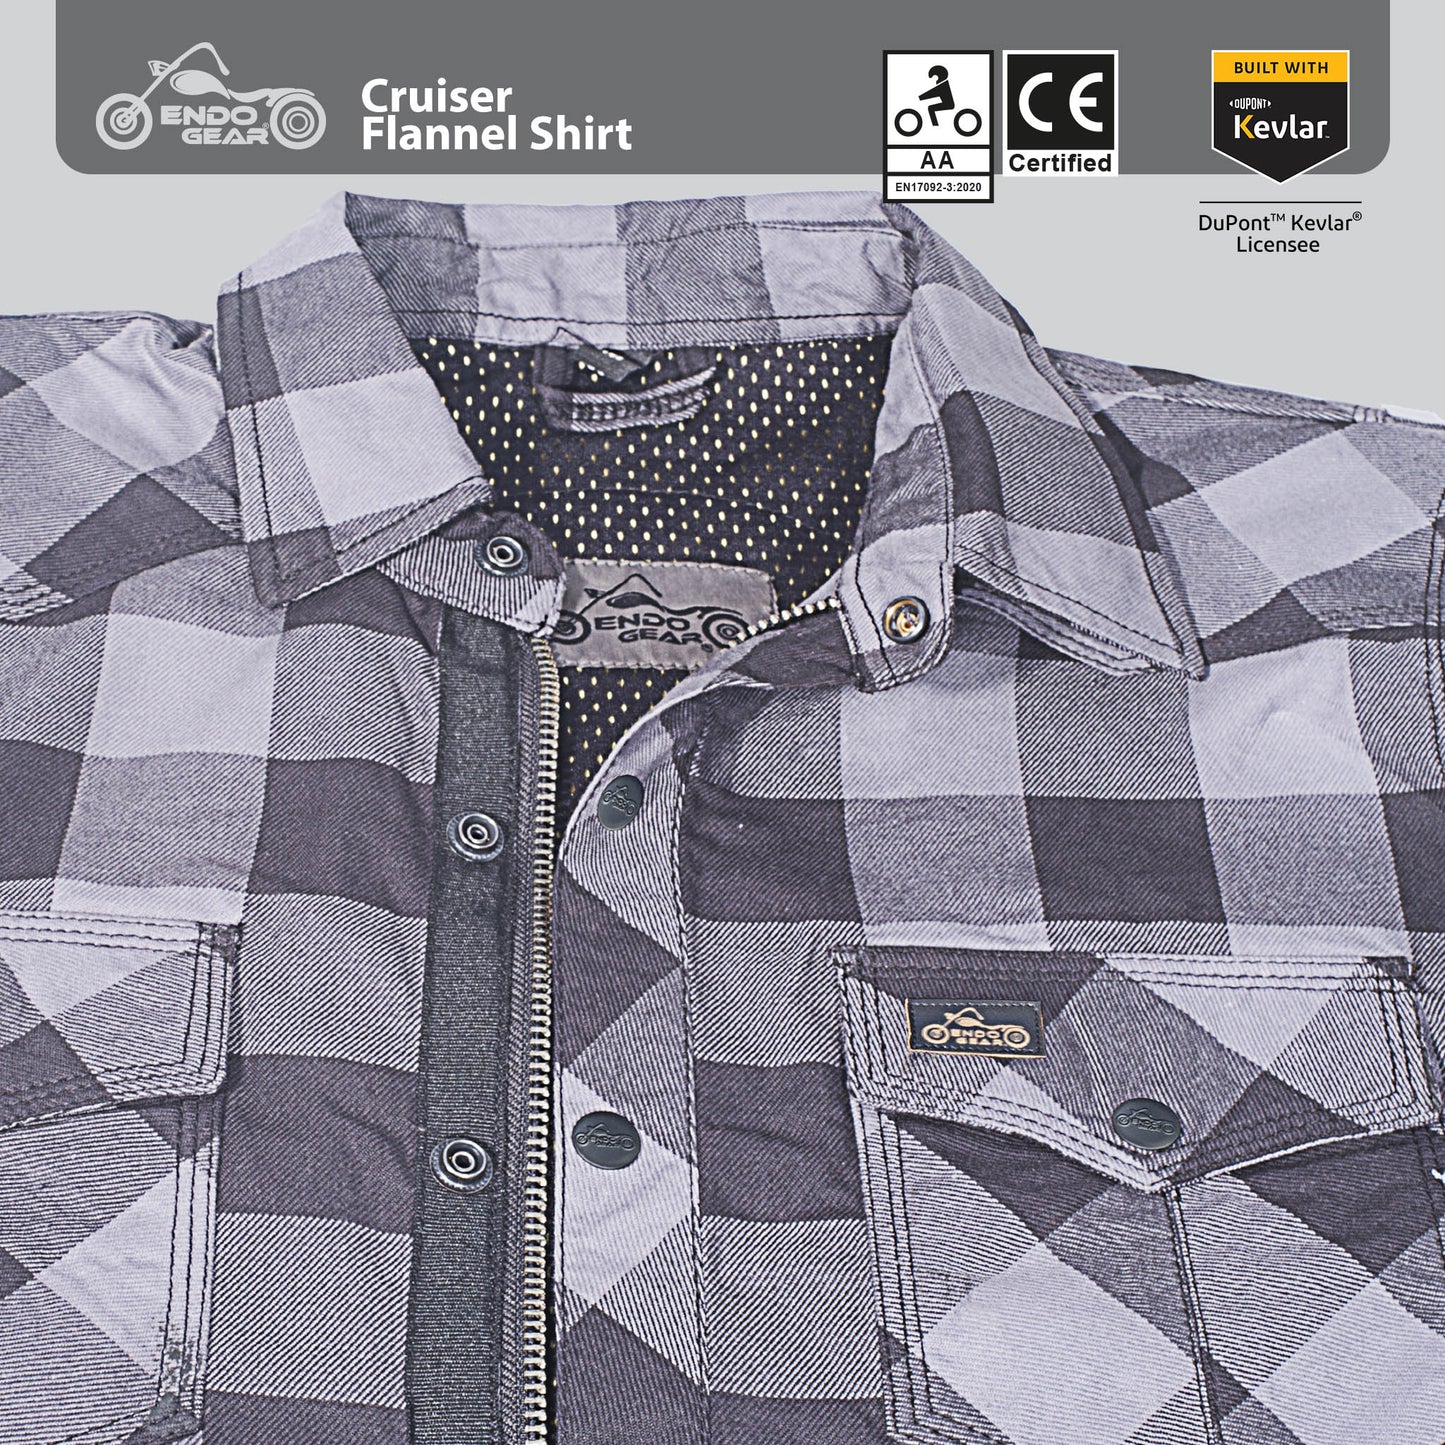 Motorcycle Flannel Riding Shirt - Grey/Black